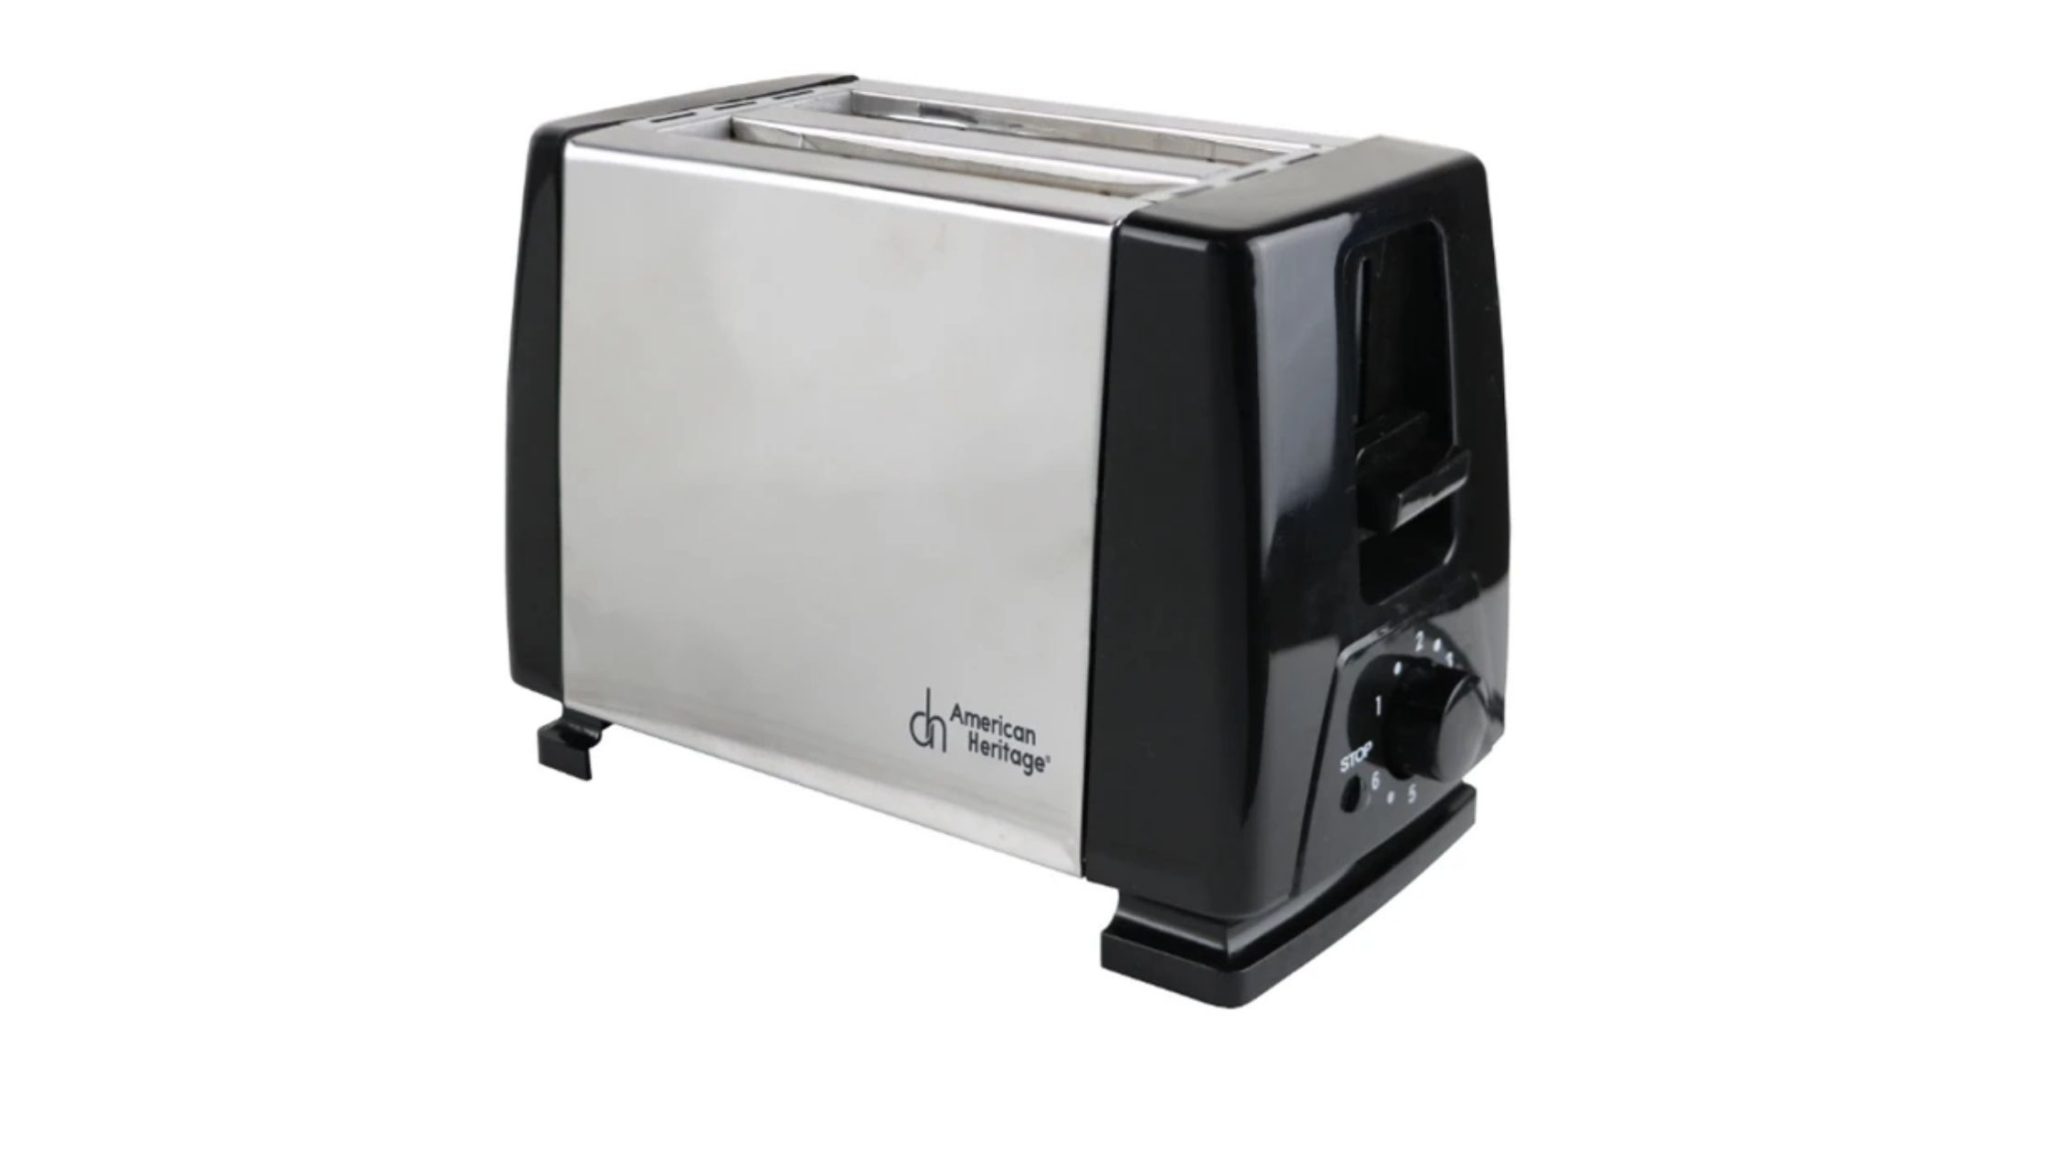 cheap Toasters in the Philippines 